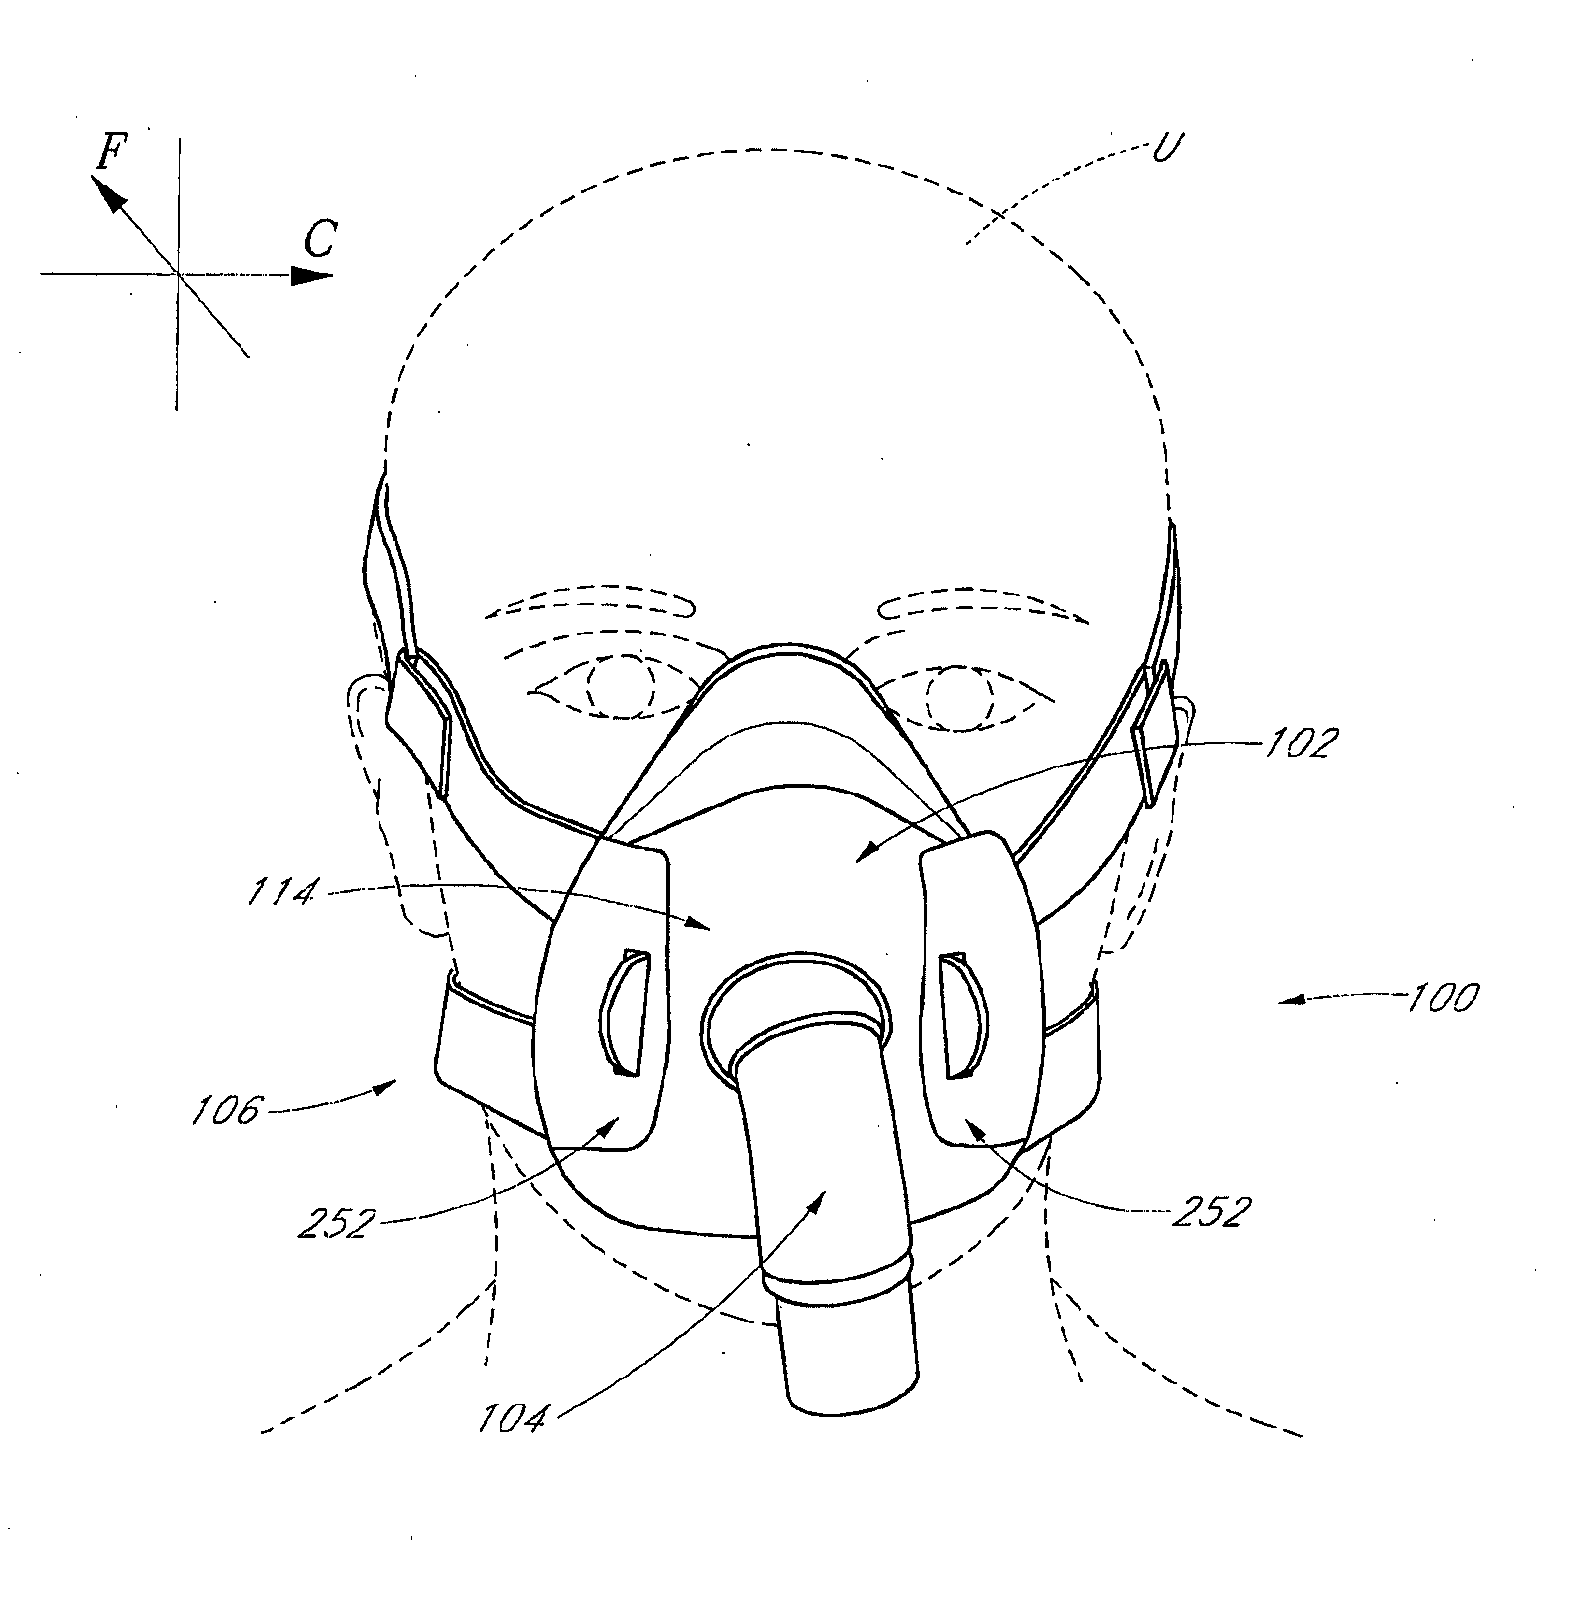 Interface comprising a nasal sealing portion and a rolling hinge